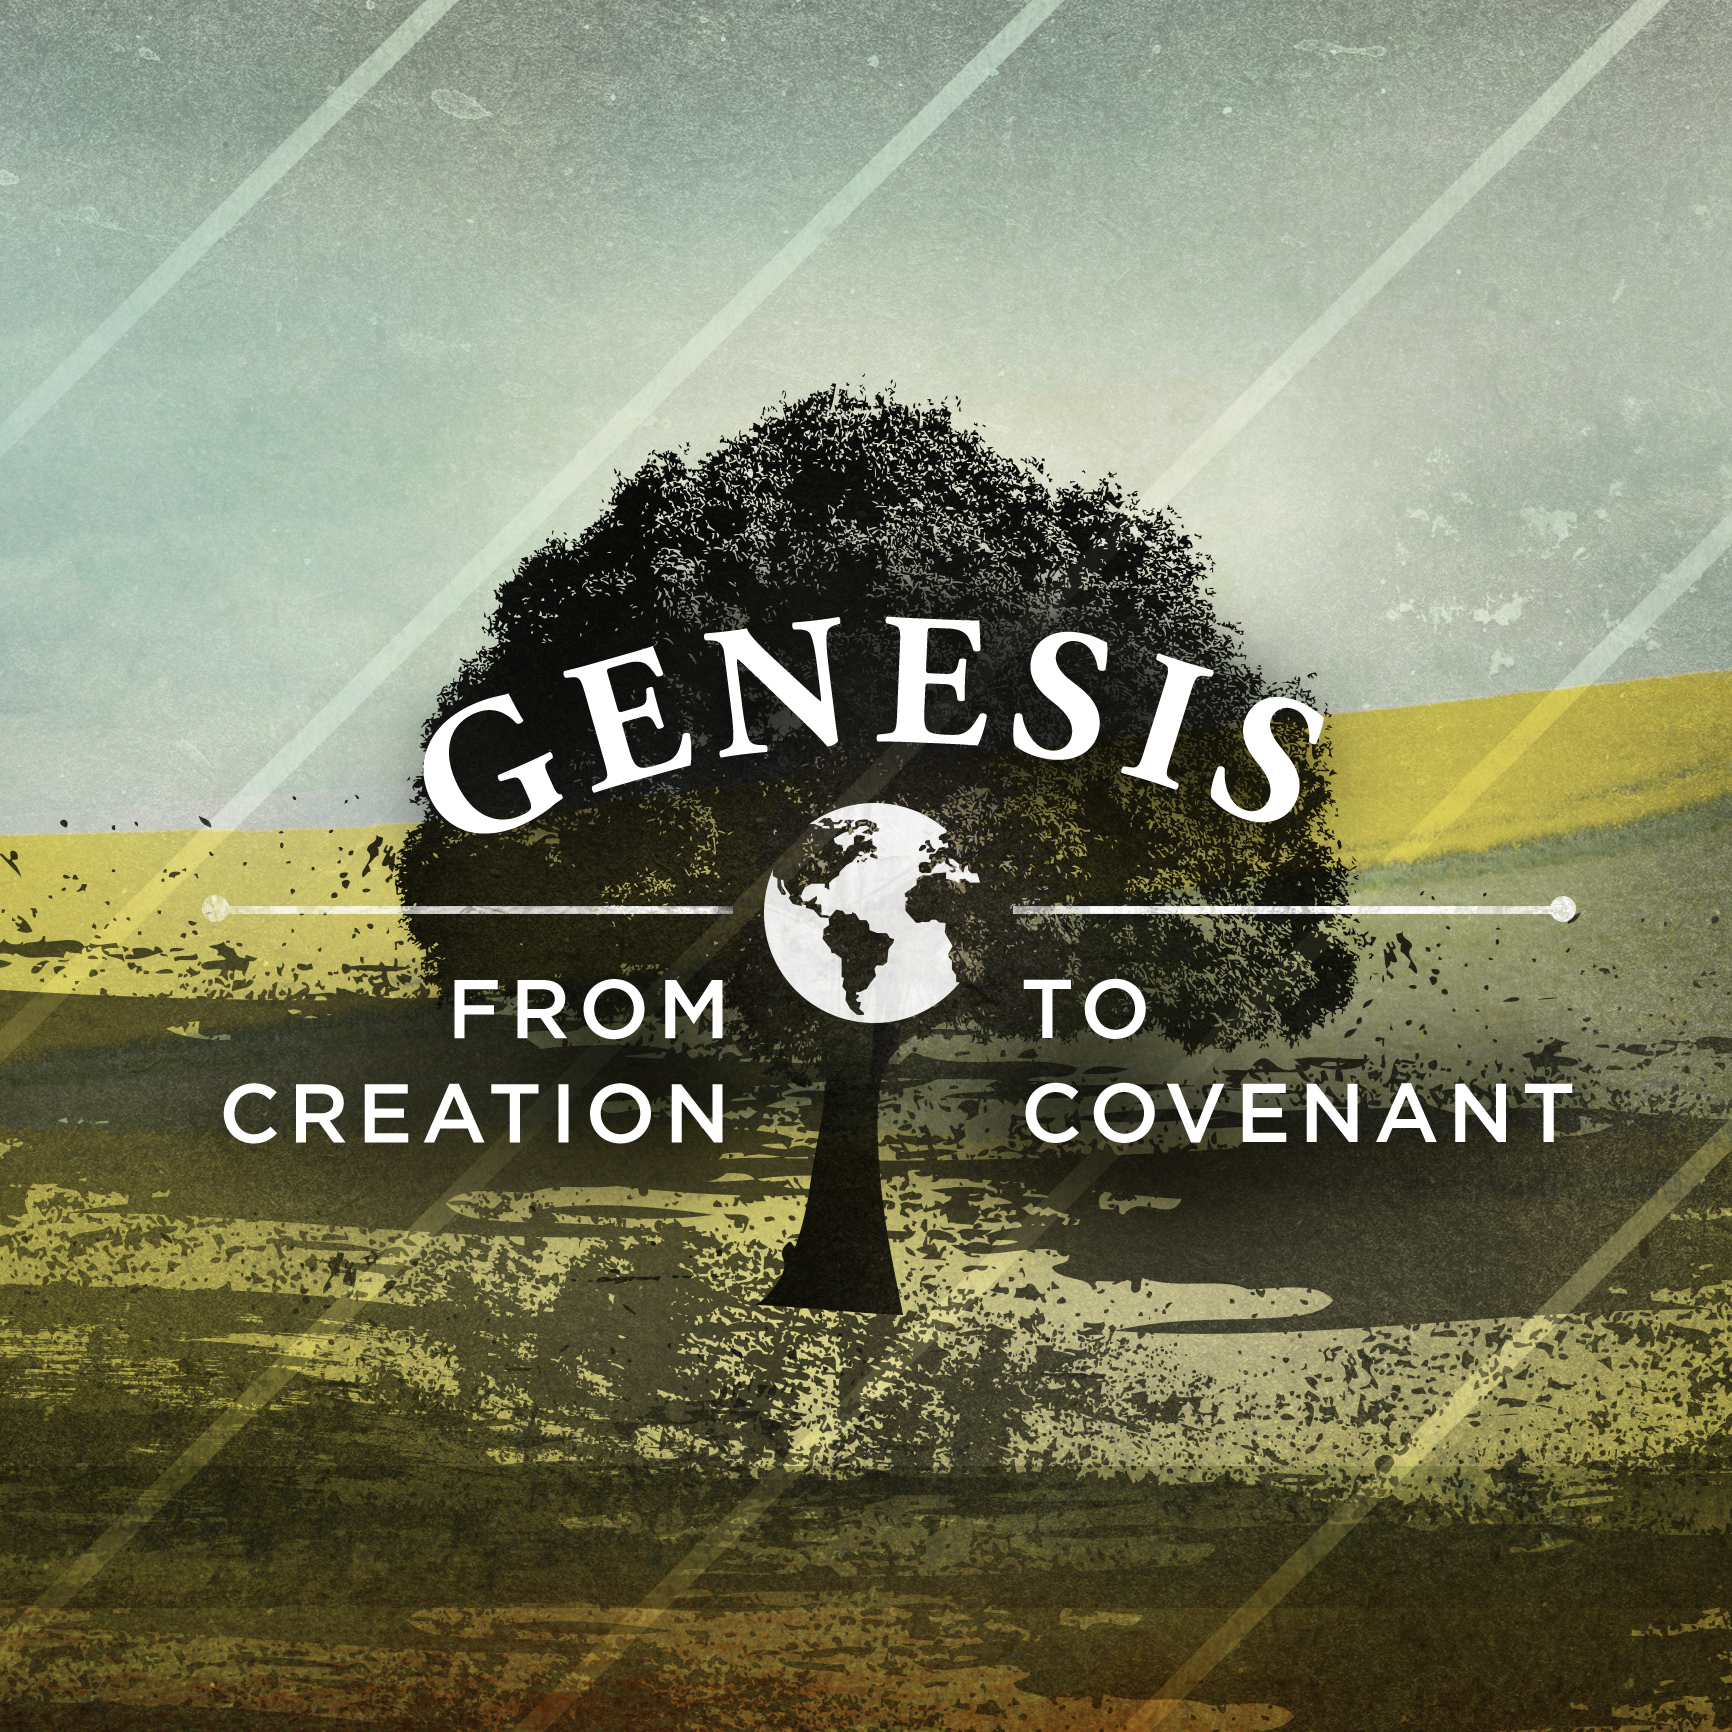 Genesis: From Creation, to Covenant